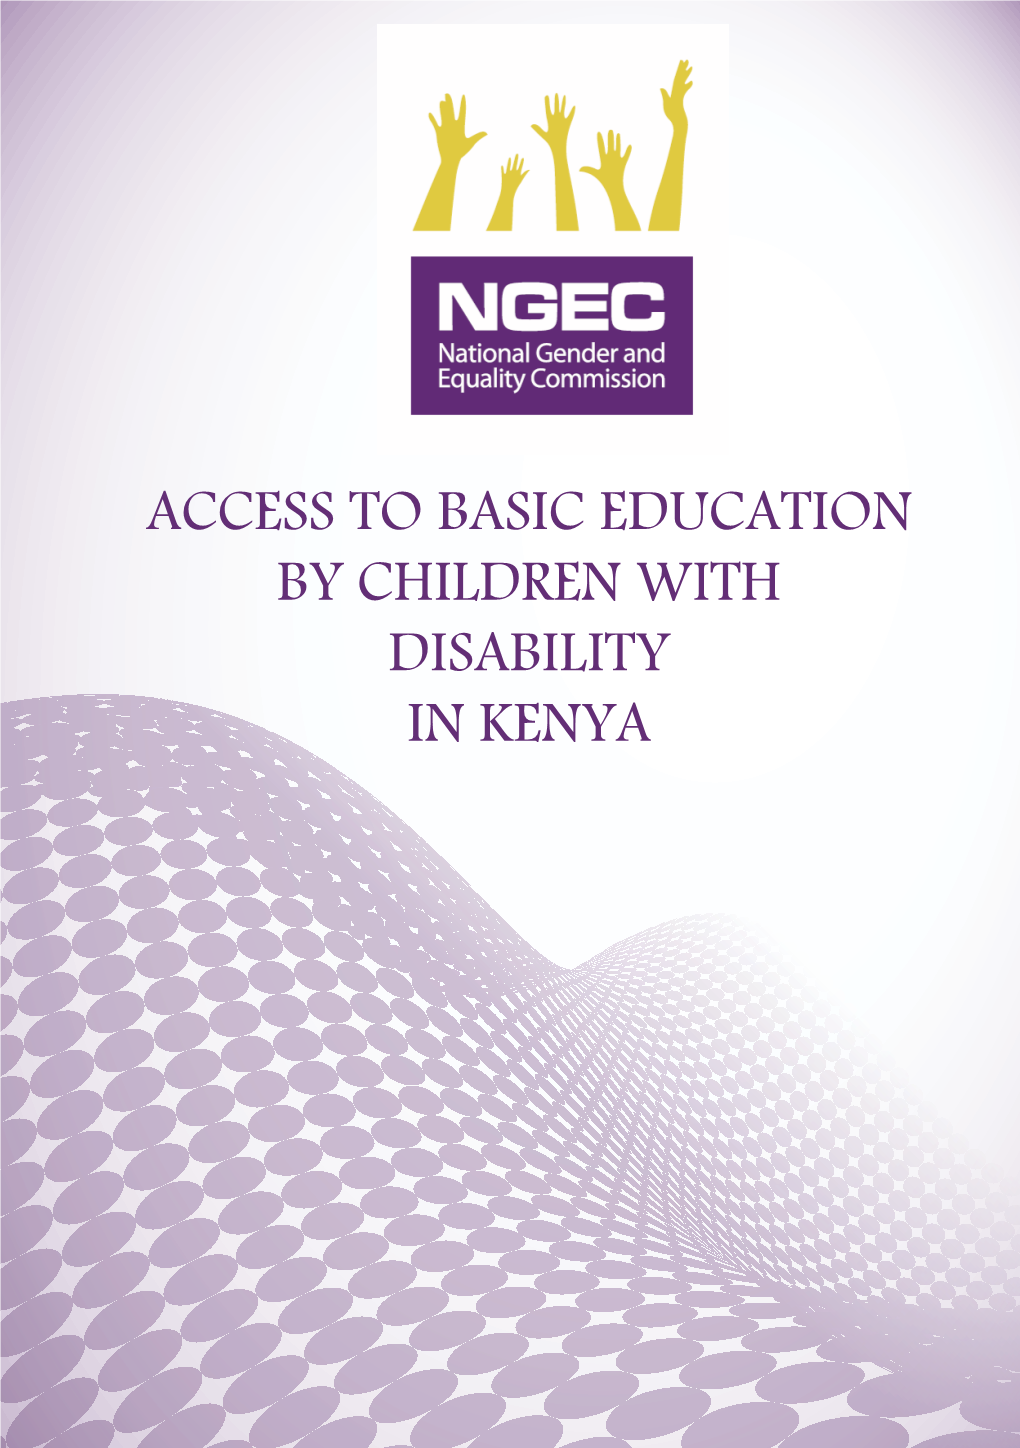 Access to Basic Education by Children with Disability in Kenya